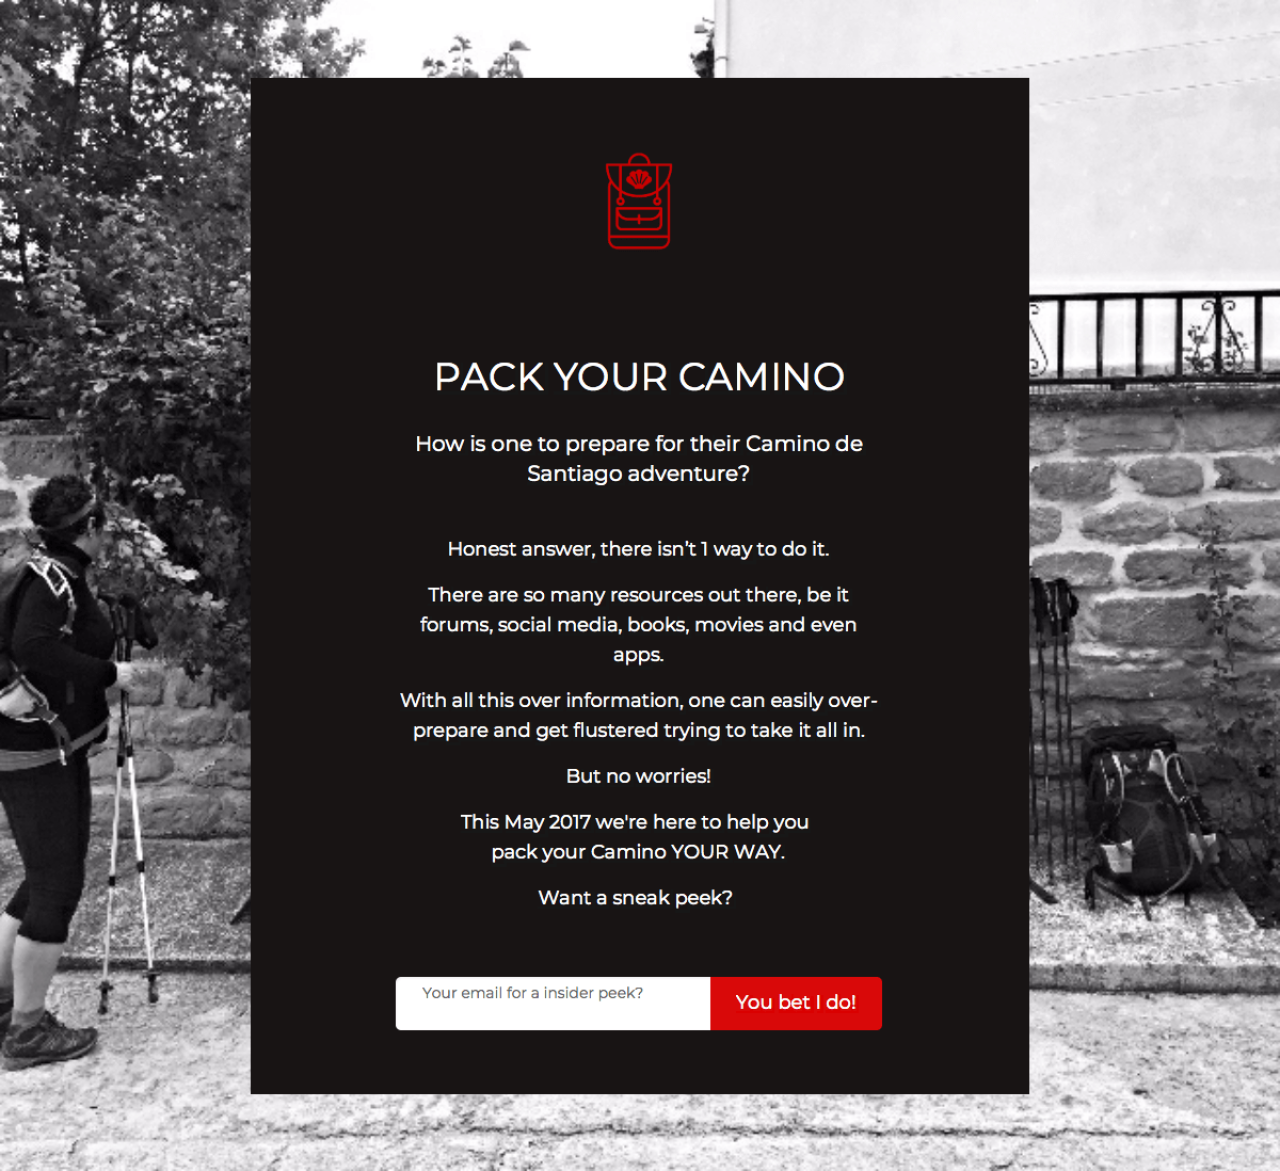 Pack Your Camino example - Made with MailerLite